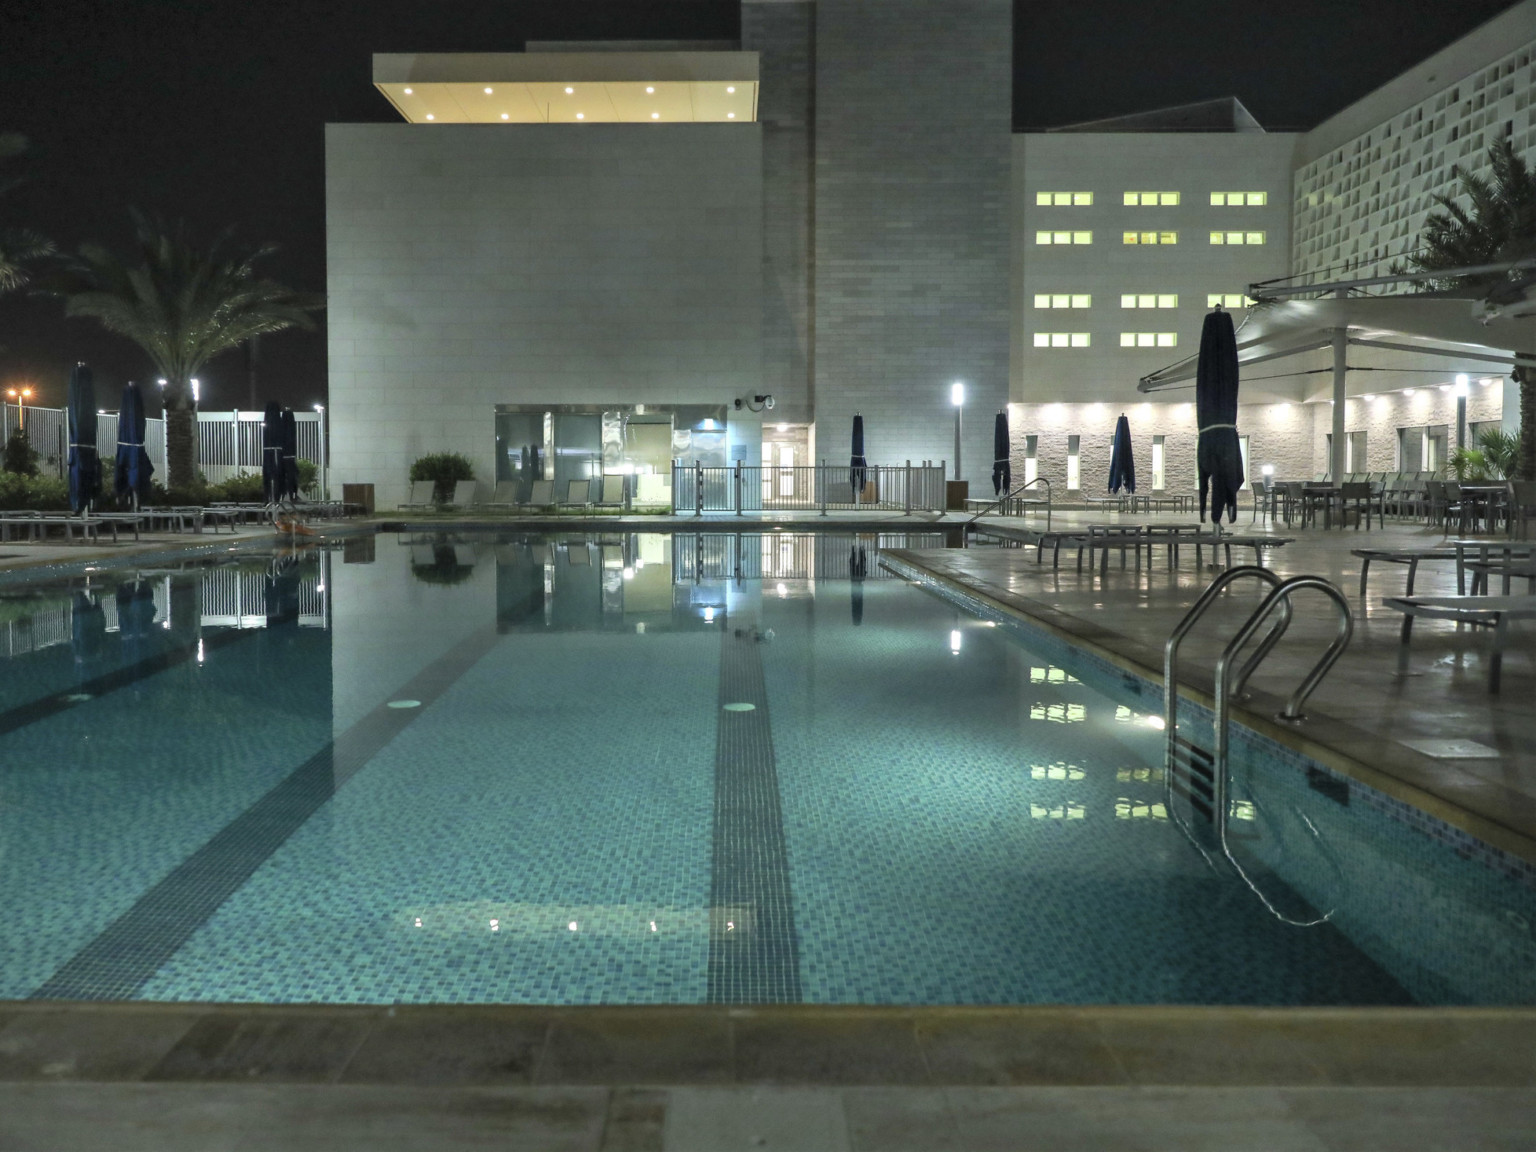 Outdoor swimming pool at night with lounge chairs and umbrellas right. Behind is a white building with covered roof terrace